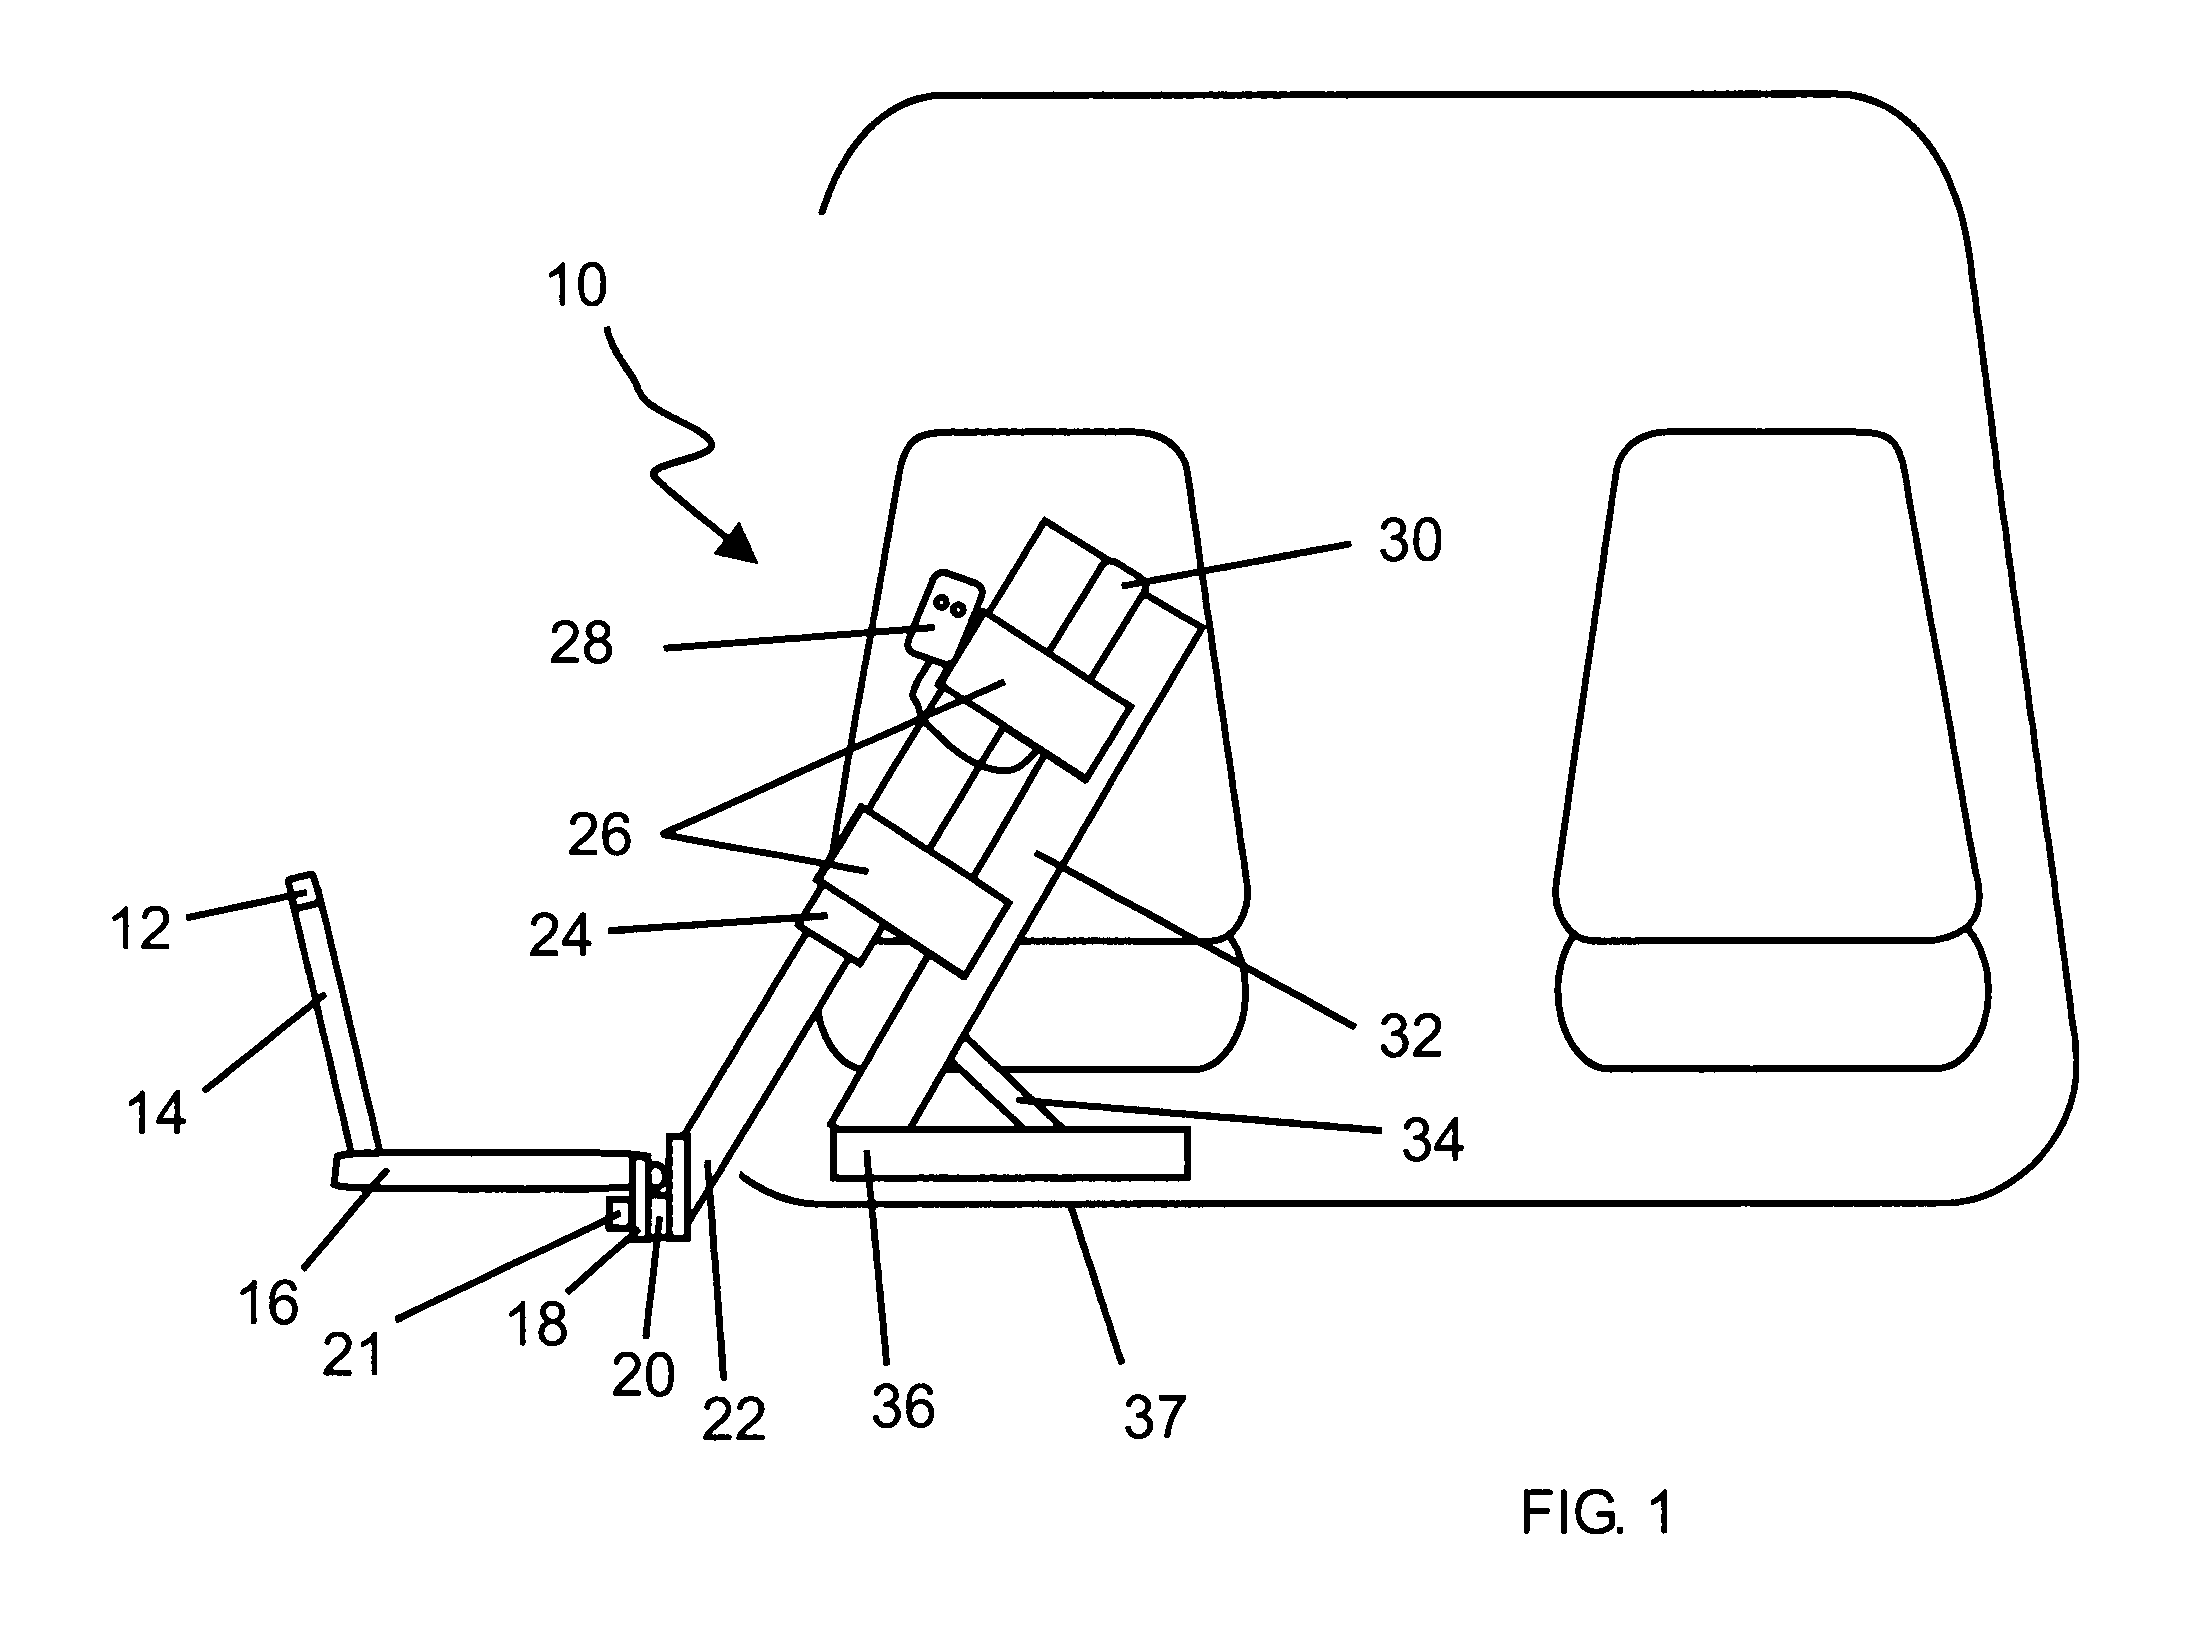 Electrically-actuated transfer seat